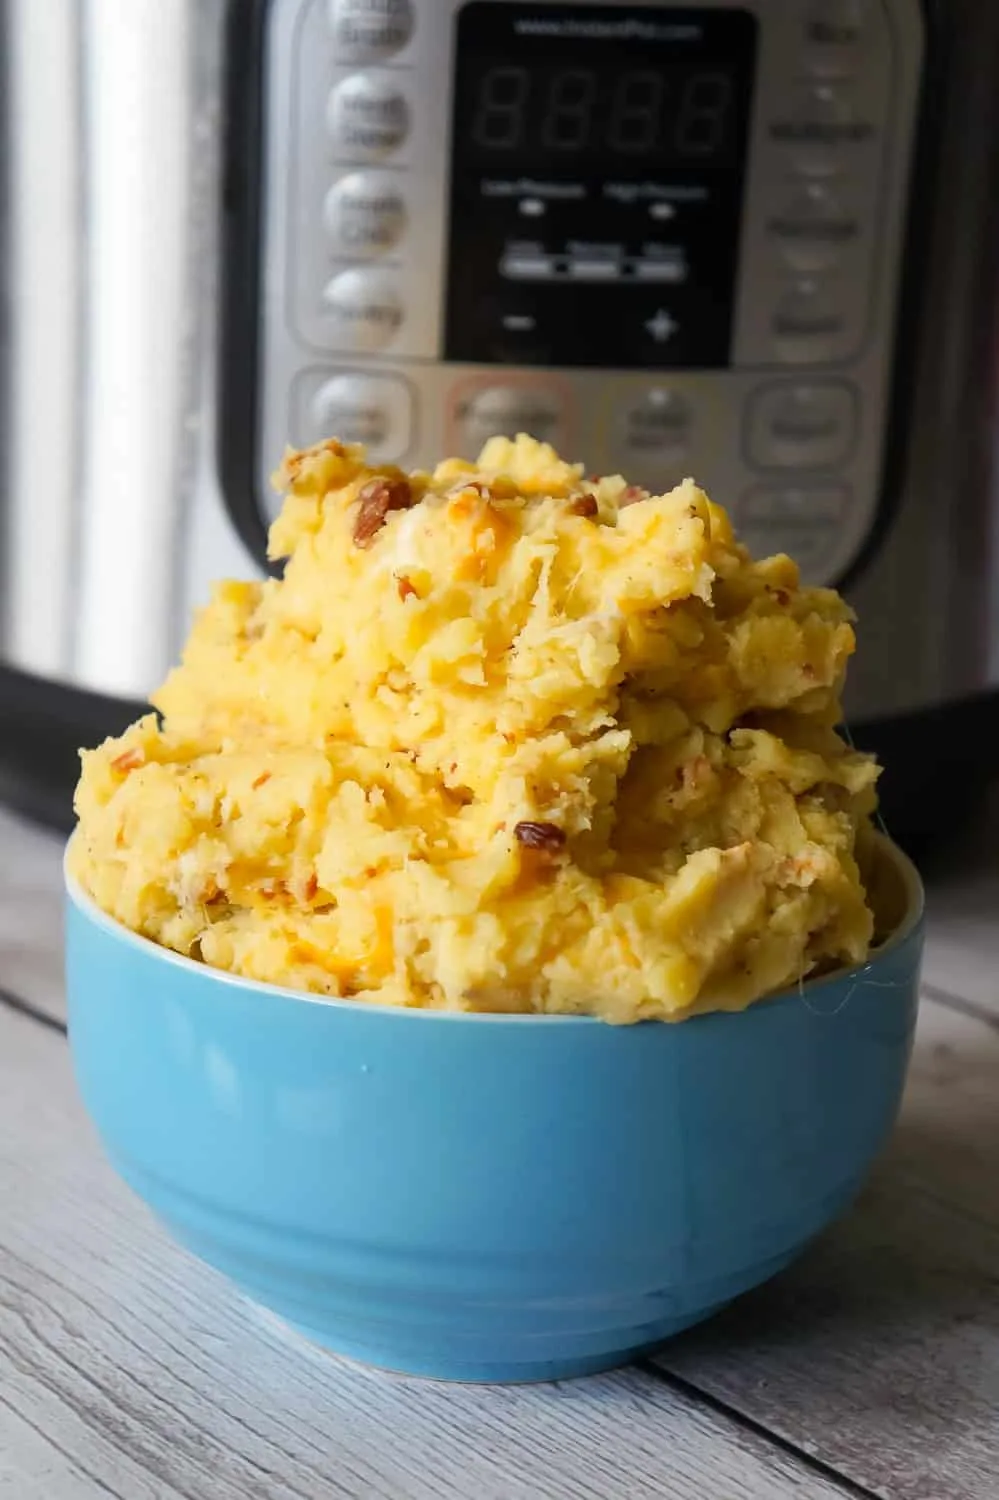 Instant Pot Cheesy Bacon Mashed Potatoes are a delicious pressure cooker side dish recipe using cream of bacon soup, crumbled bacon, cheddar and mozzarella cheese.